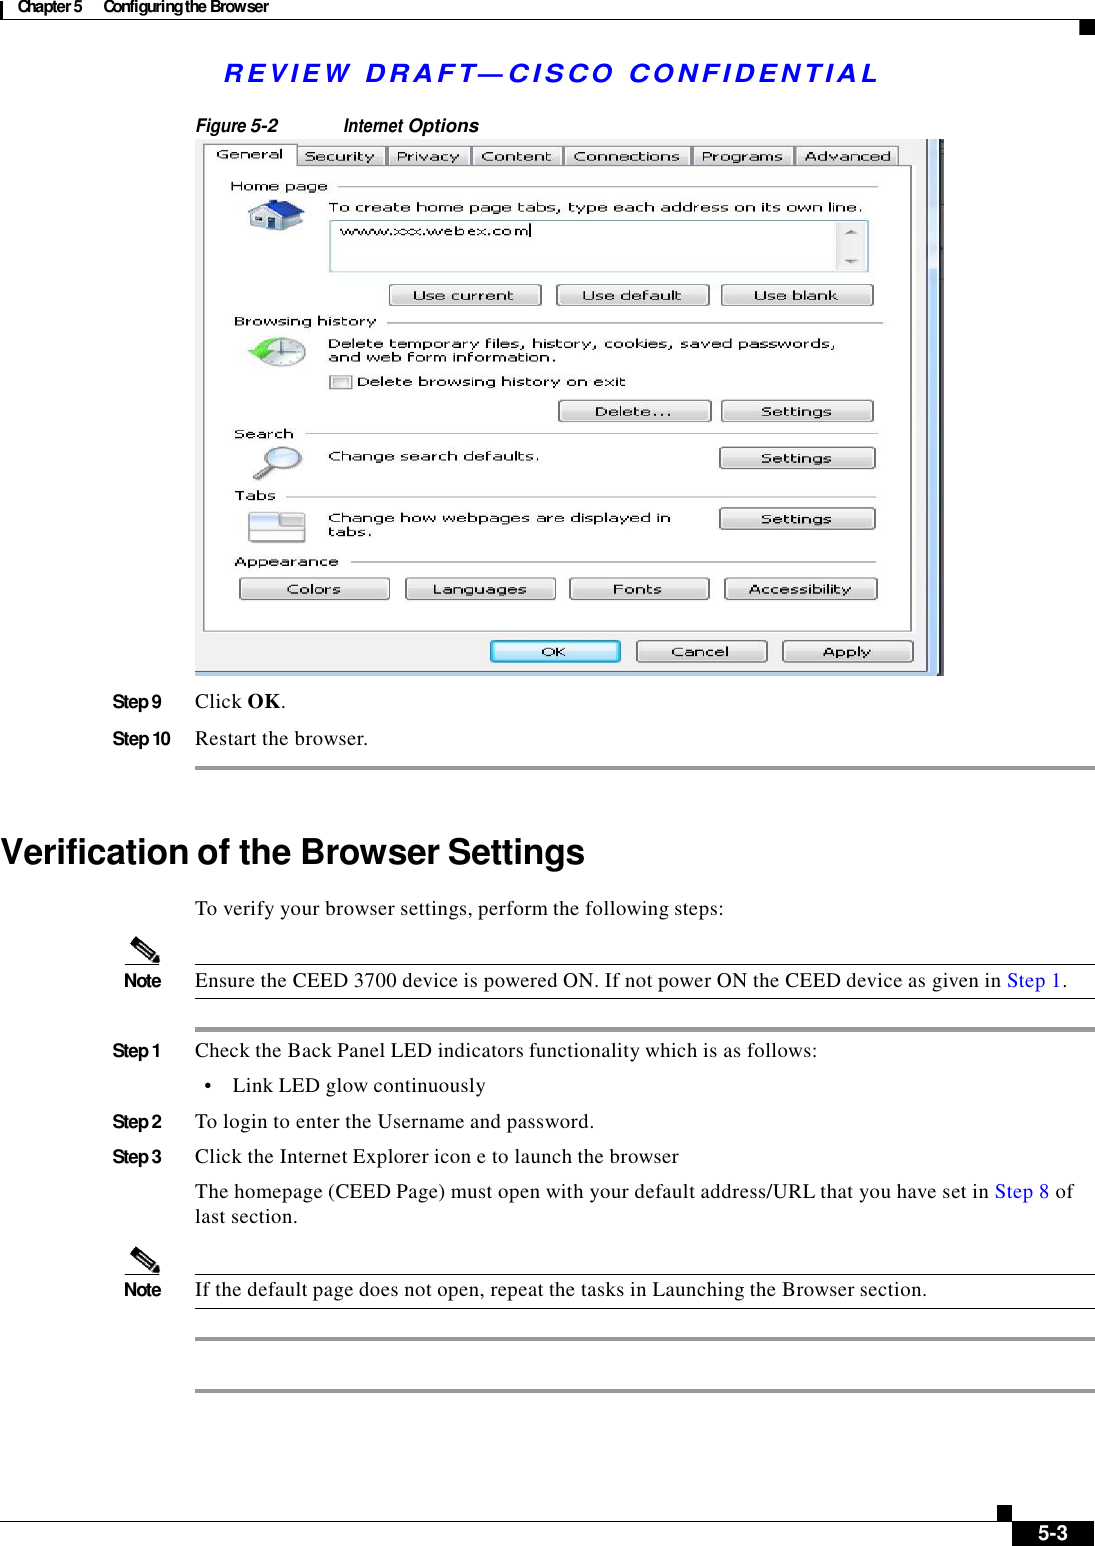  Chapter 5  Configuring the Browser   R E V I E W  DR AFT — CISC O  C O NF IDE N TIAL   Figure 5-2 Internet Options   Step 9  Click OK.  Step 10  Restart the browser.     Verification of the Browser Settings  To verify your browser settings, perform the following steps:   Note  Ensure the CEED 3700 device is powered ON. If not power ON the CEED device as given in Step 1.   Step 1  Check the Back Panel LED indicators functionality which is as follows:  •    Link LED glow continuously  Step 2  To login to enter the Username and password.  Step 3  Click the Internet Explorer icon e to launch the browser  The homepage (CEED Page) must open with your default address/URL that you have set in Step 8 of last section.   Note  If the default page does not open, repeat the tasks in Launching the Browser section.               5-3 